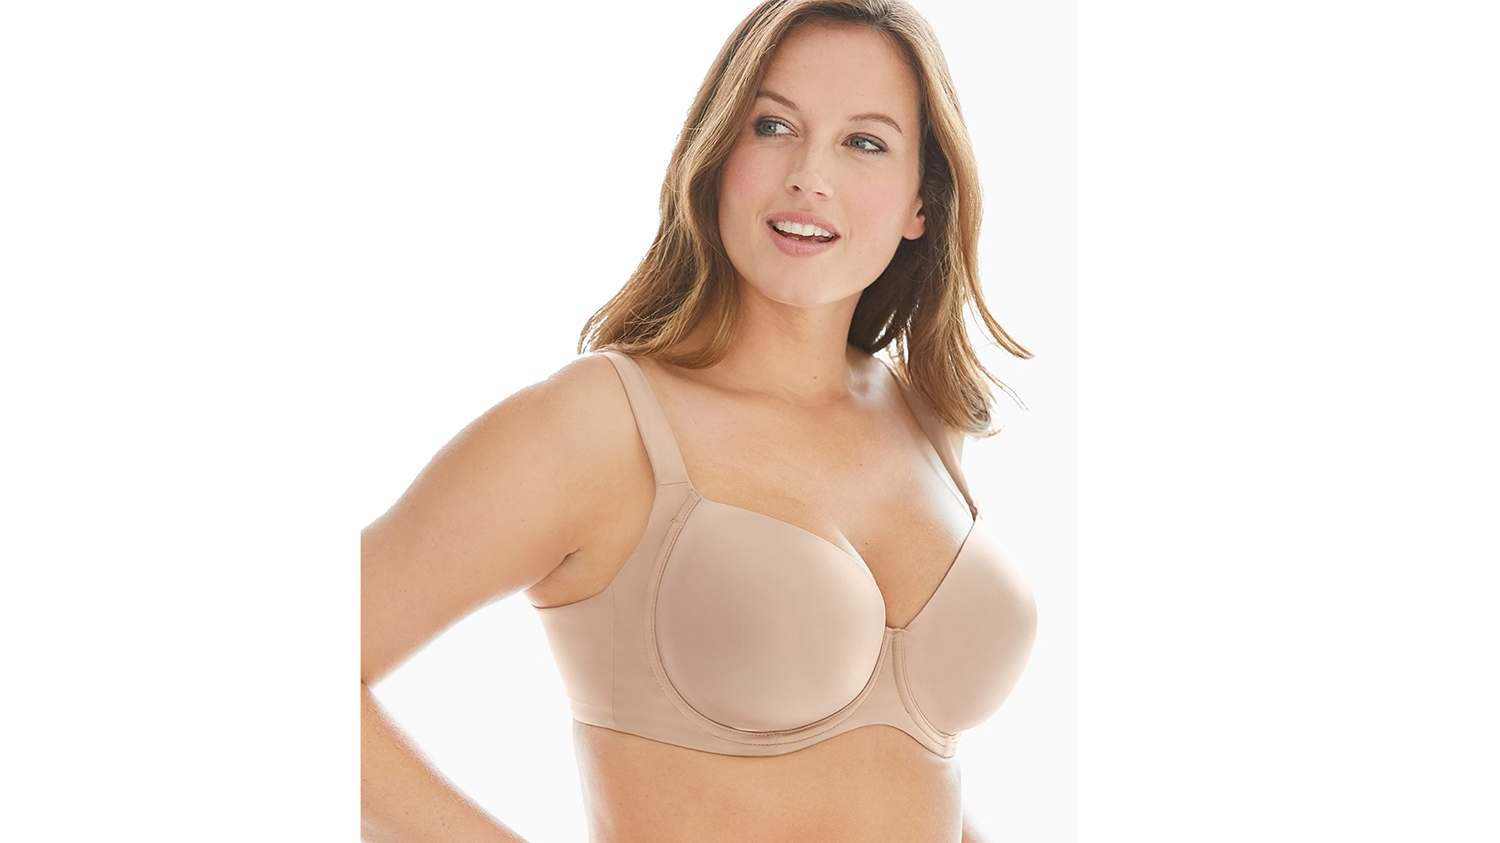 The Best Supportive Bras For Big Busts Are 50% Off at Soma